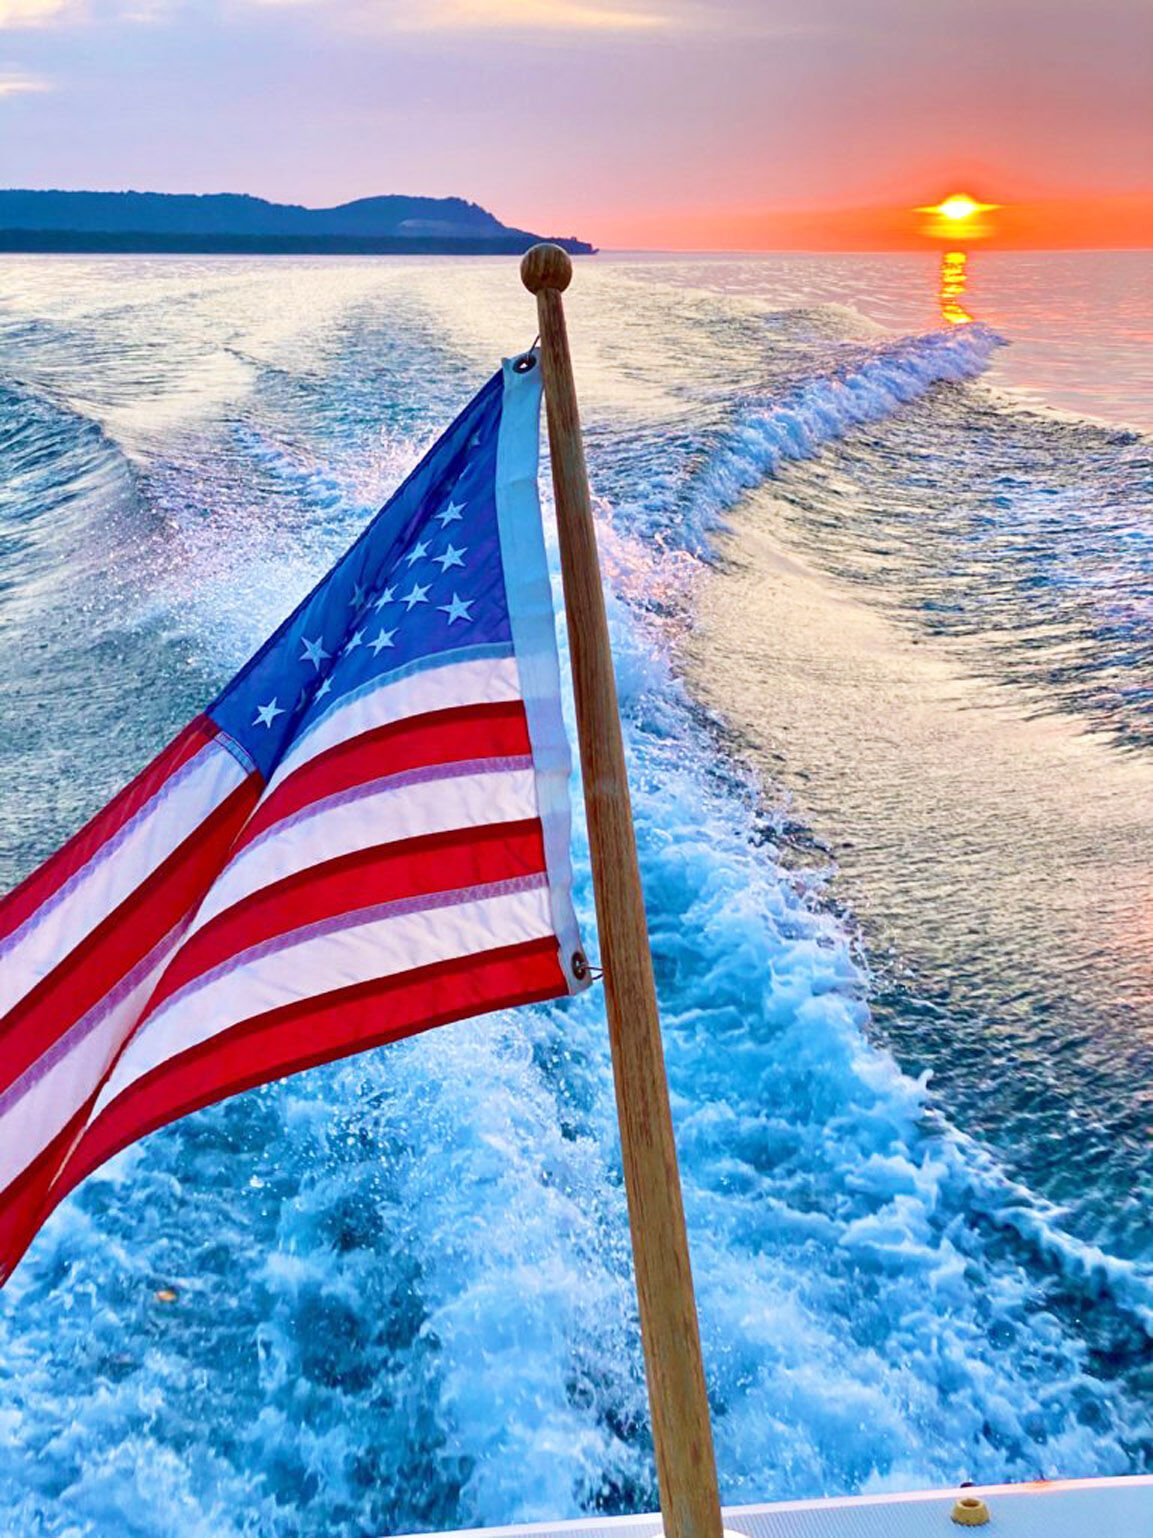 Pontoon paradise awaits you: Fourth of July is a biggie for boaters